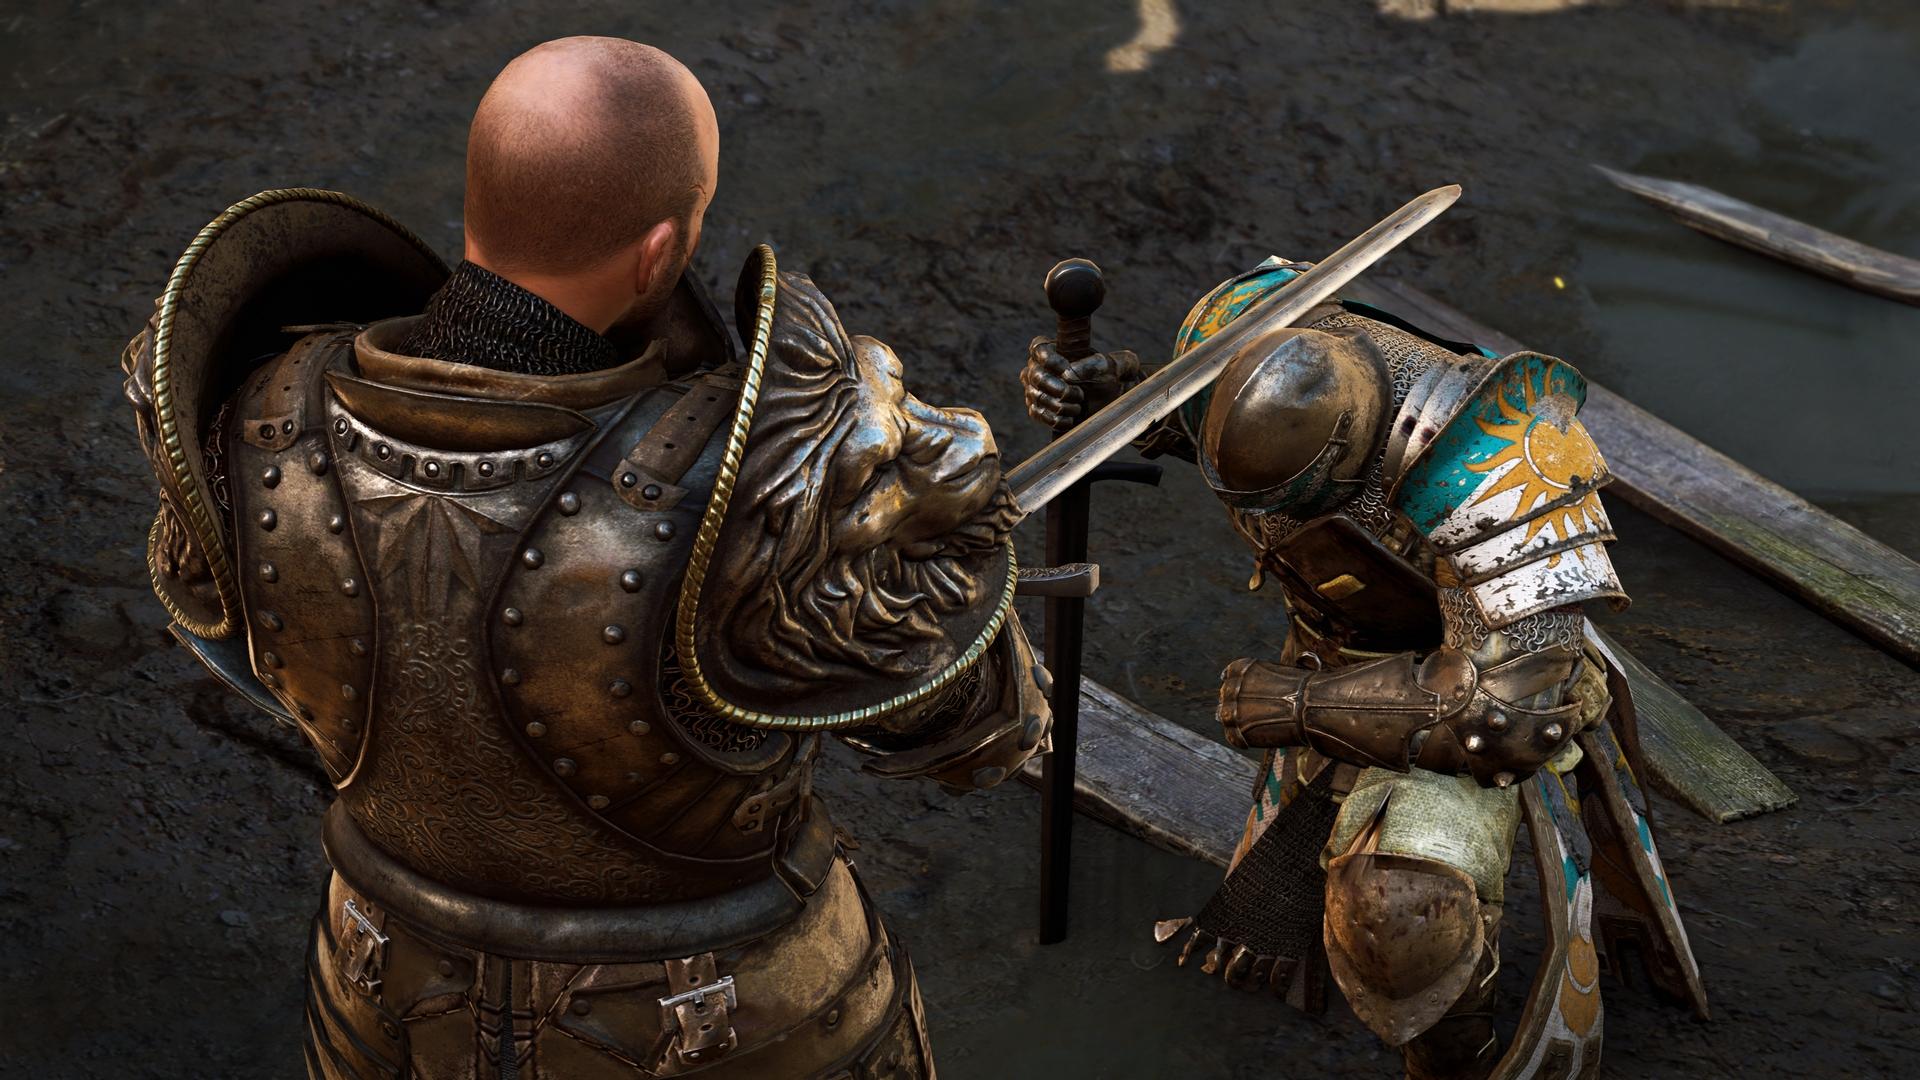 For Honor Season 2 'Might & Magic' Released Alongside Massive Patch 1.07